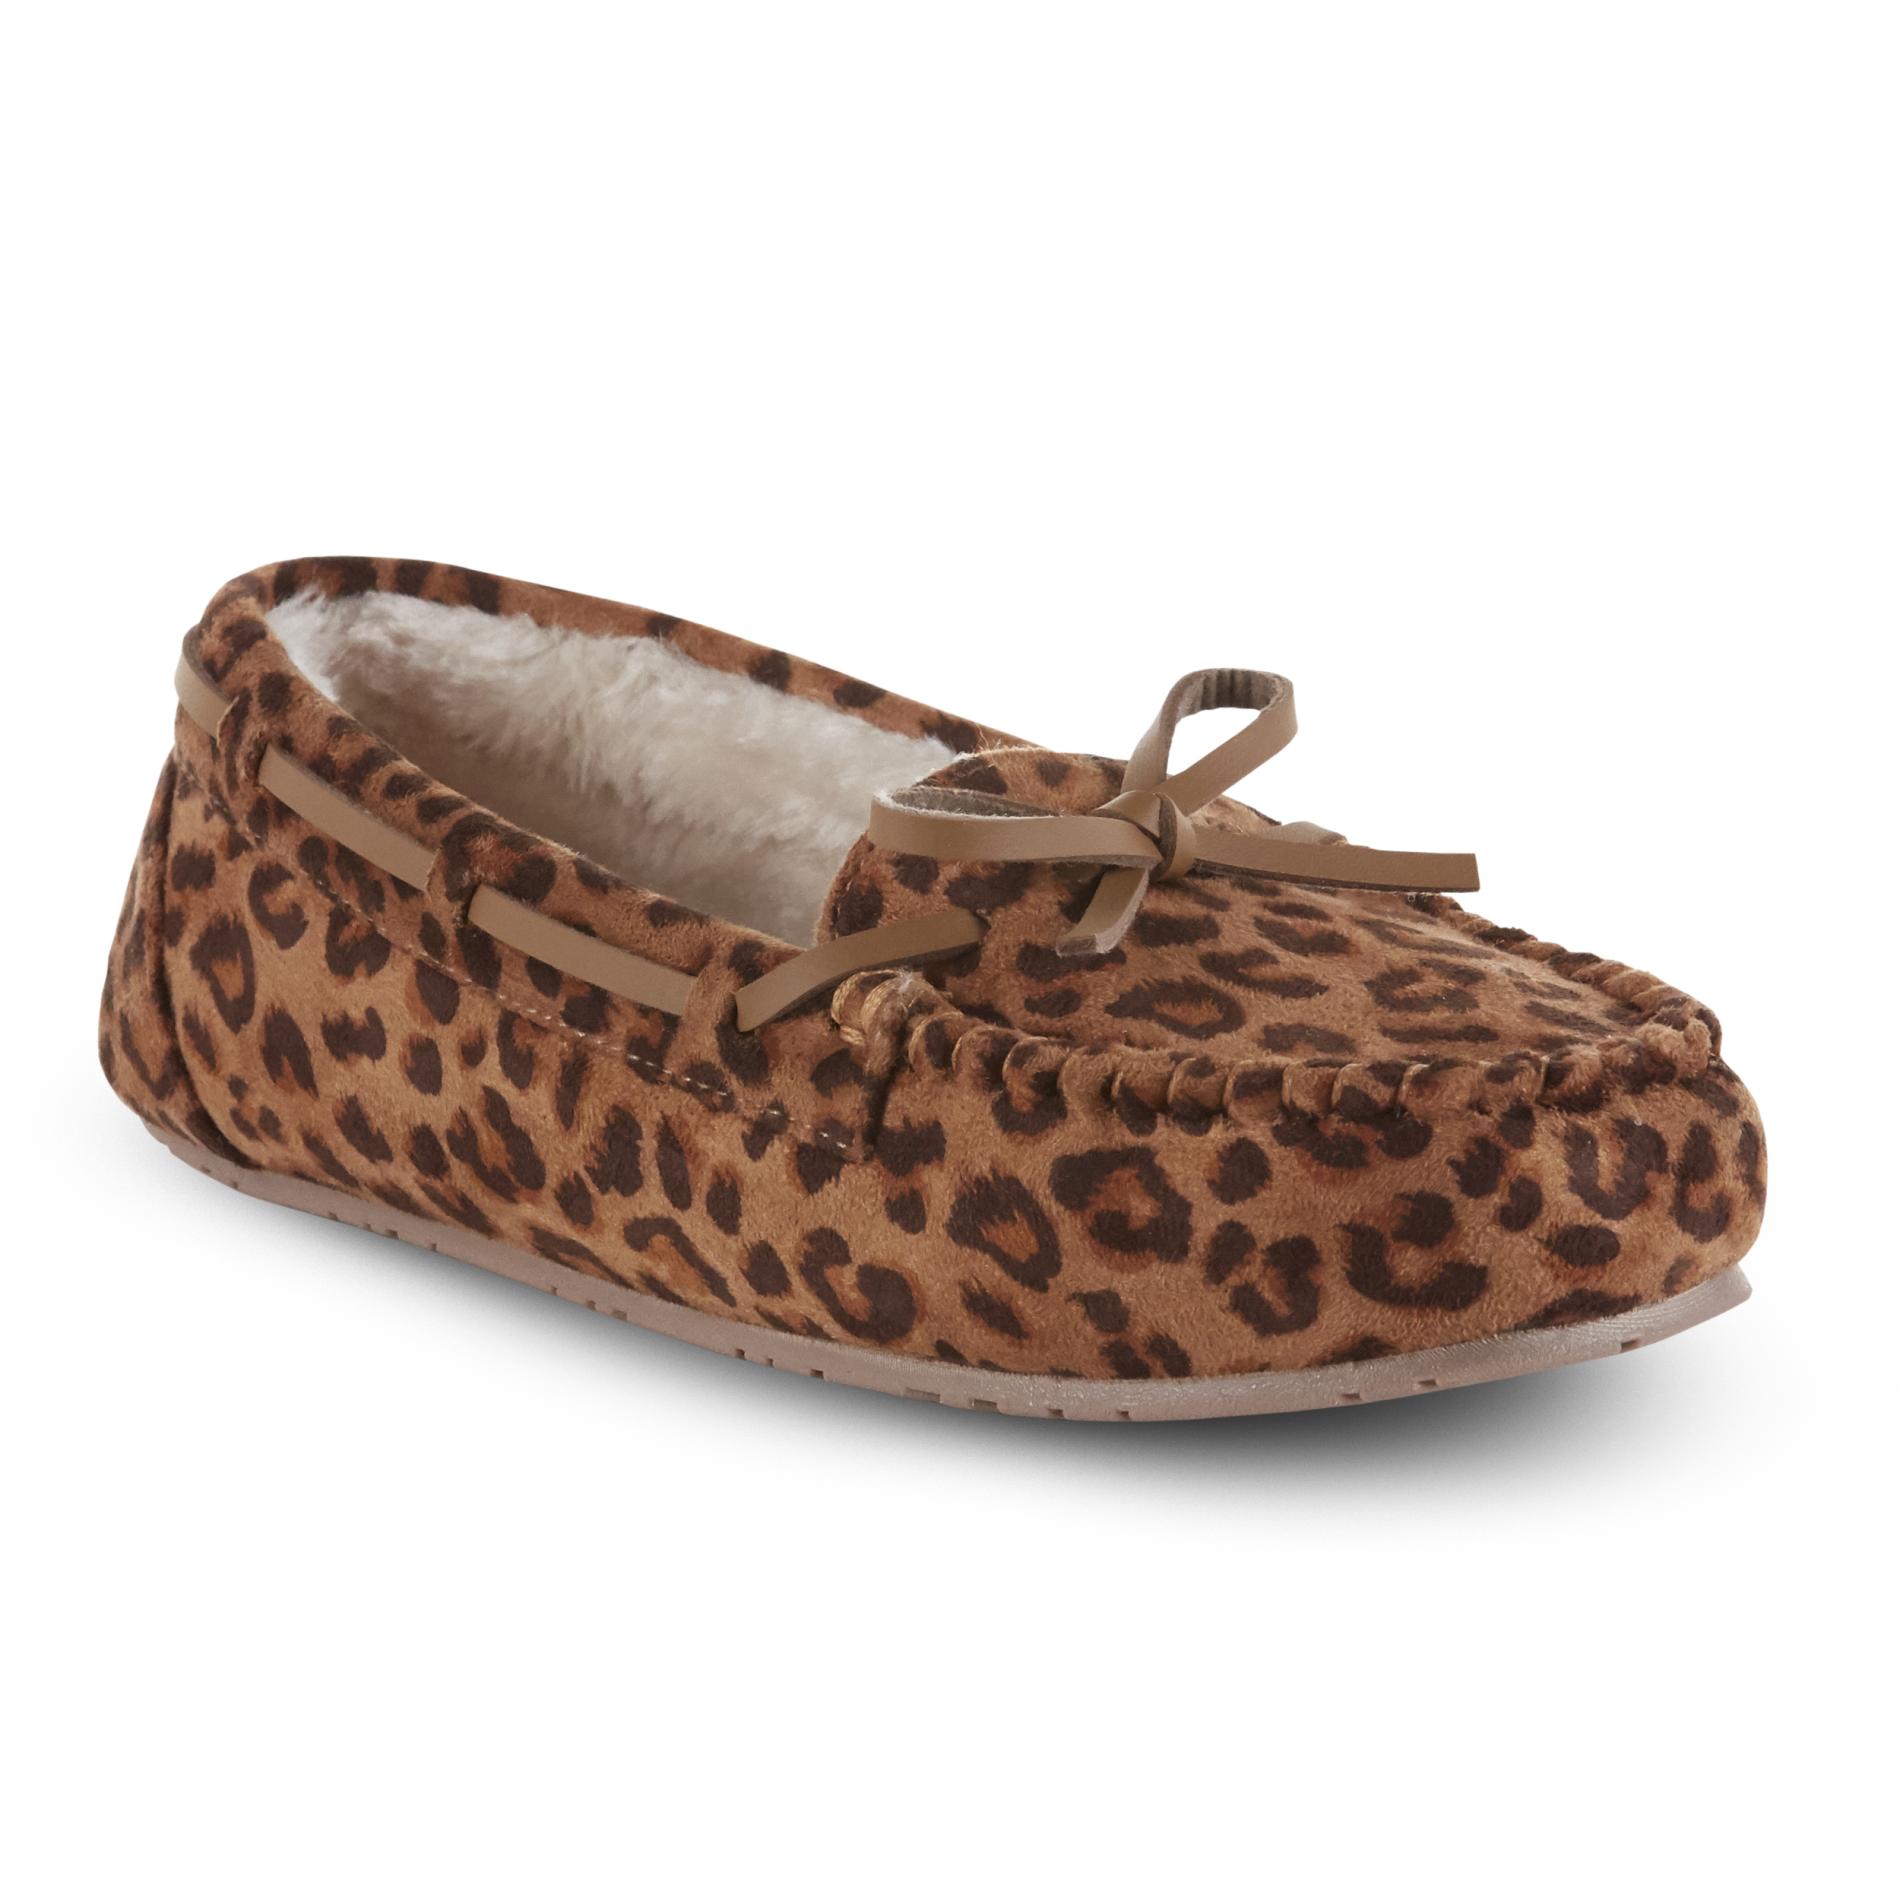 route 66 women's slippers